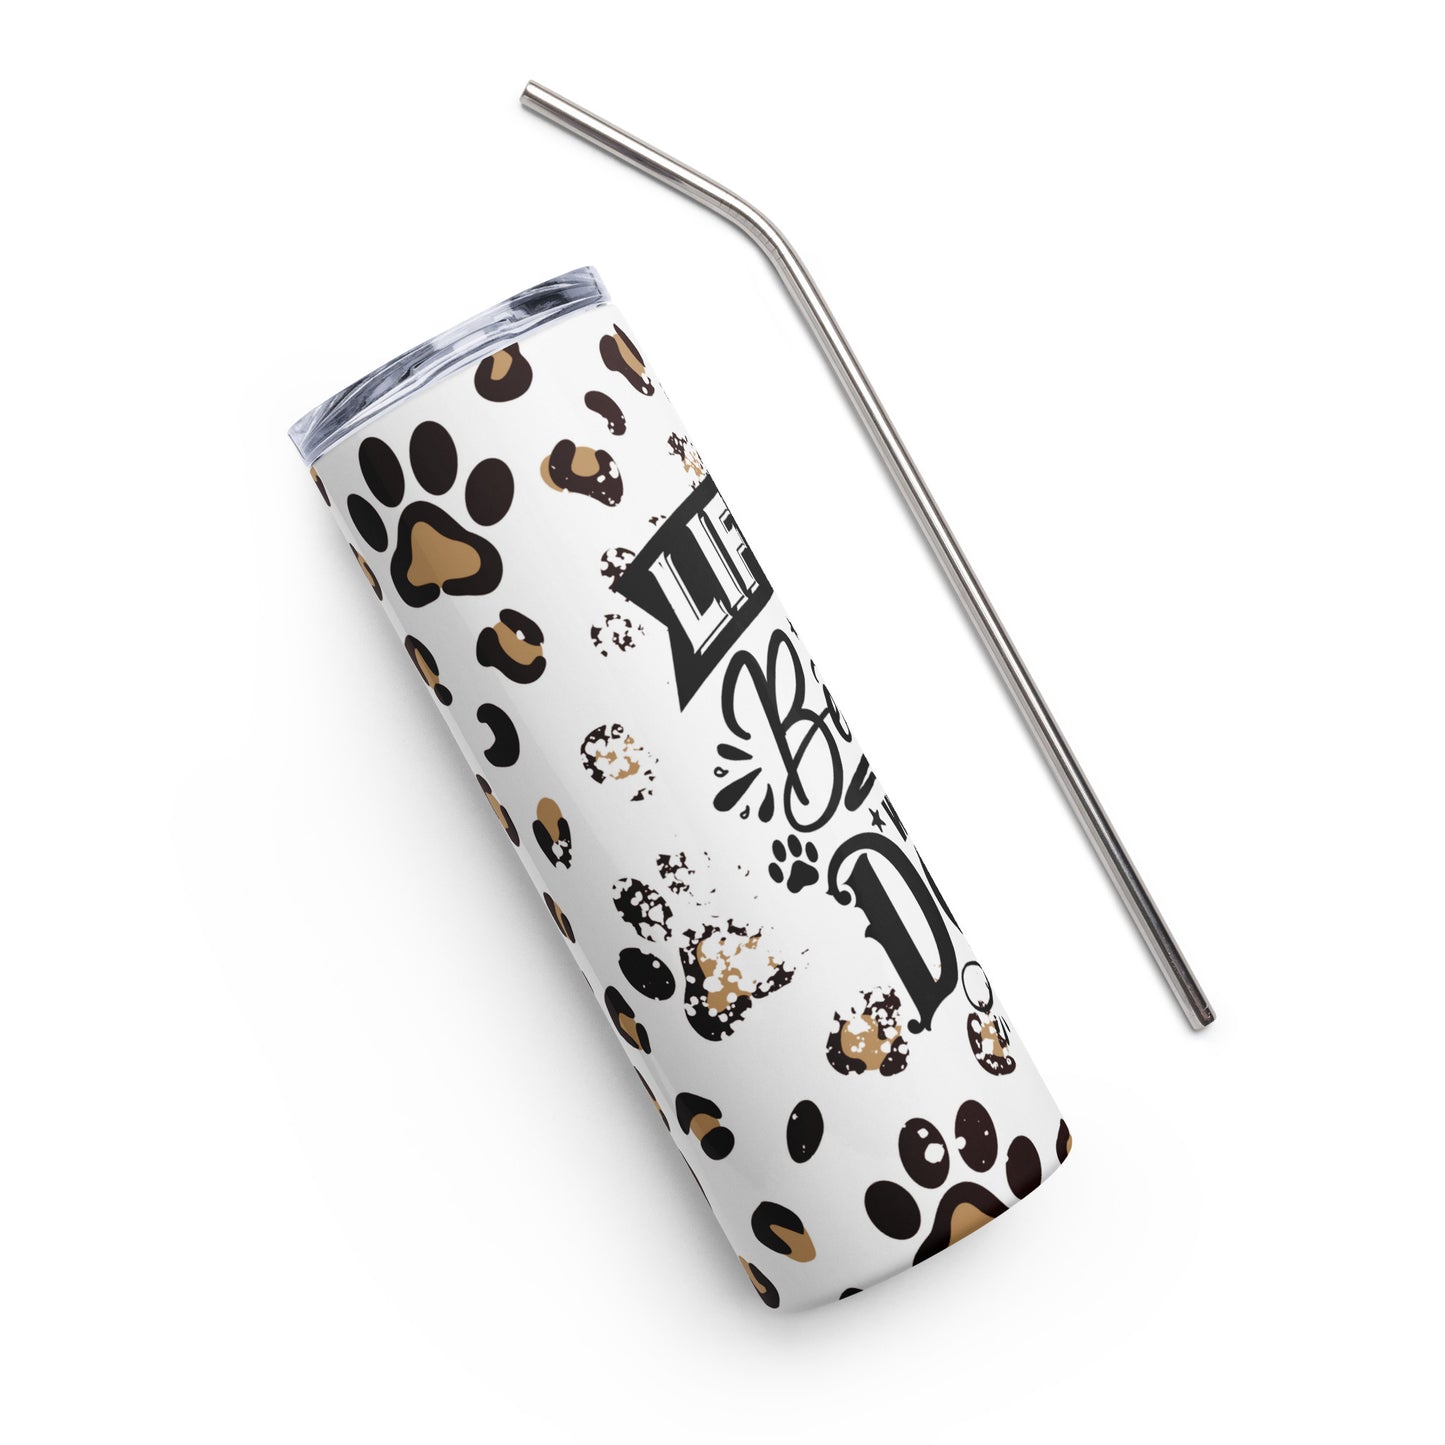 Life is Better with a Dog Stainless steel Tumbler